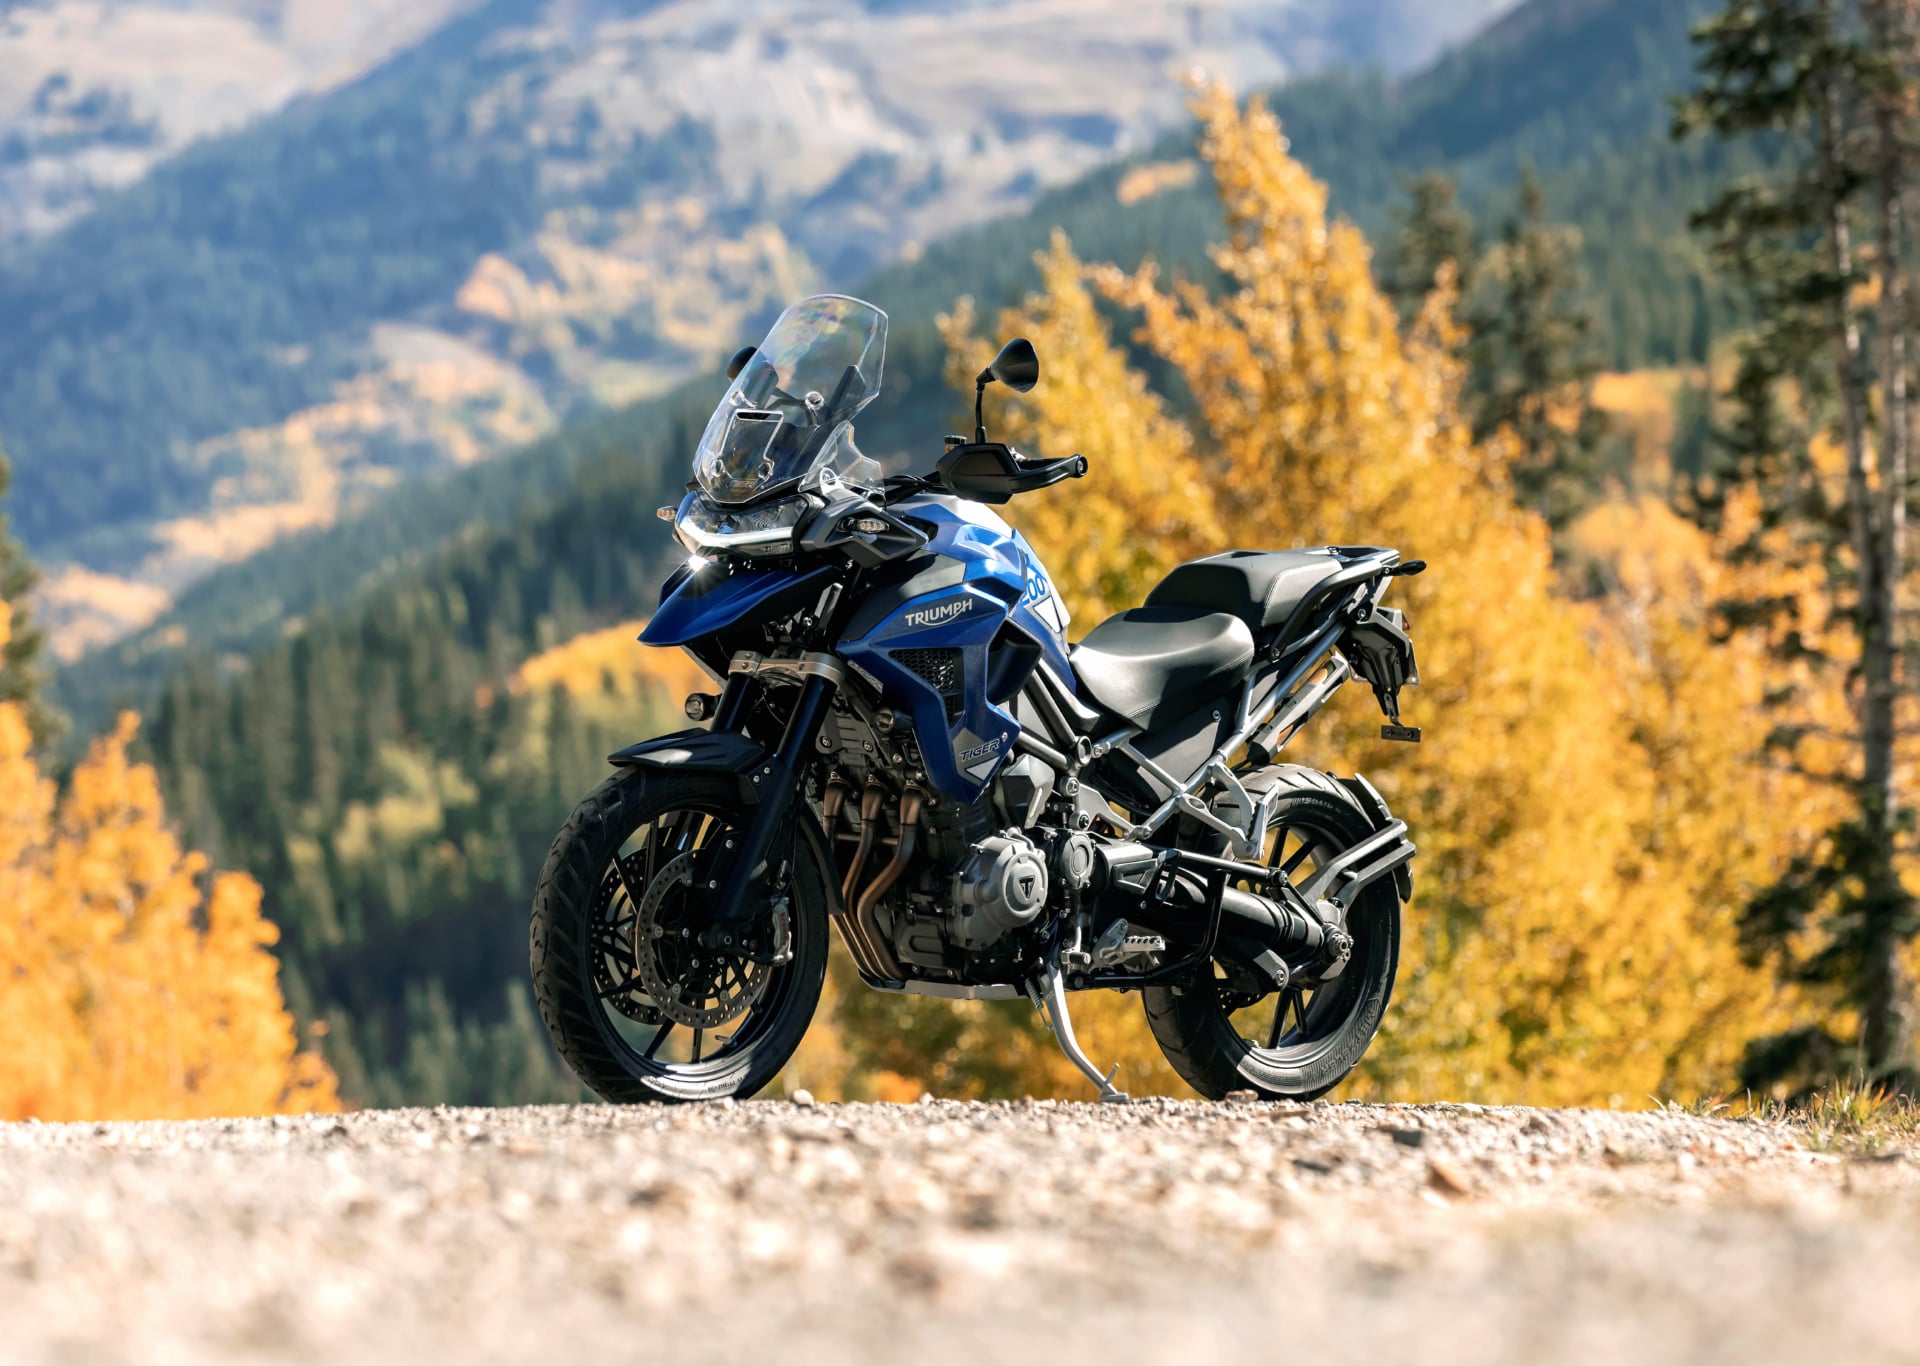 Triumph Tiger 1200 wallpapers HD quality